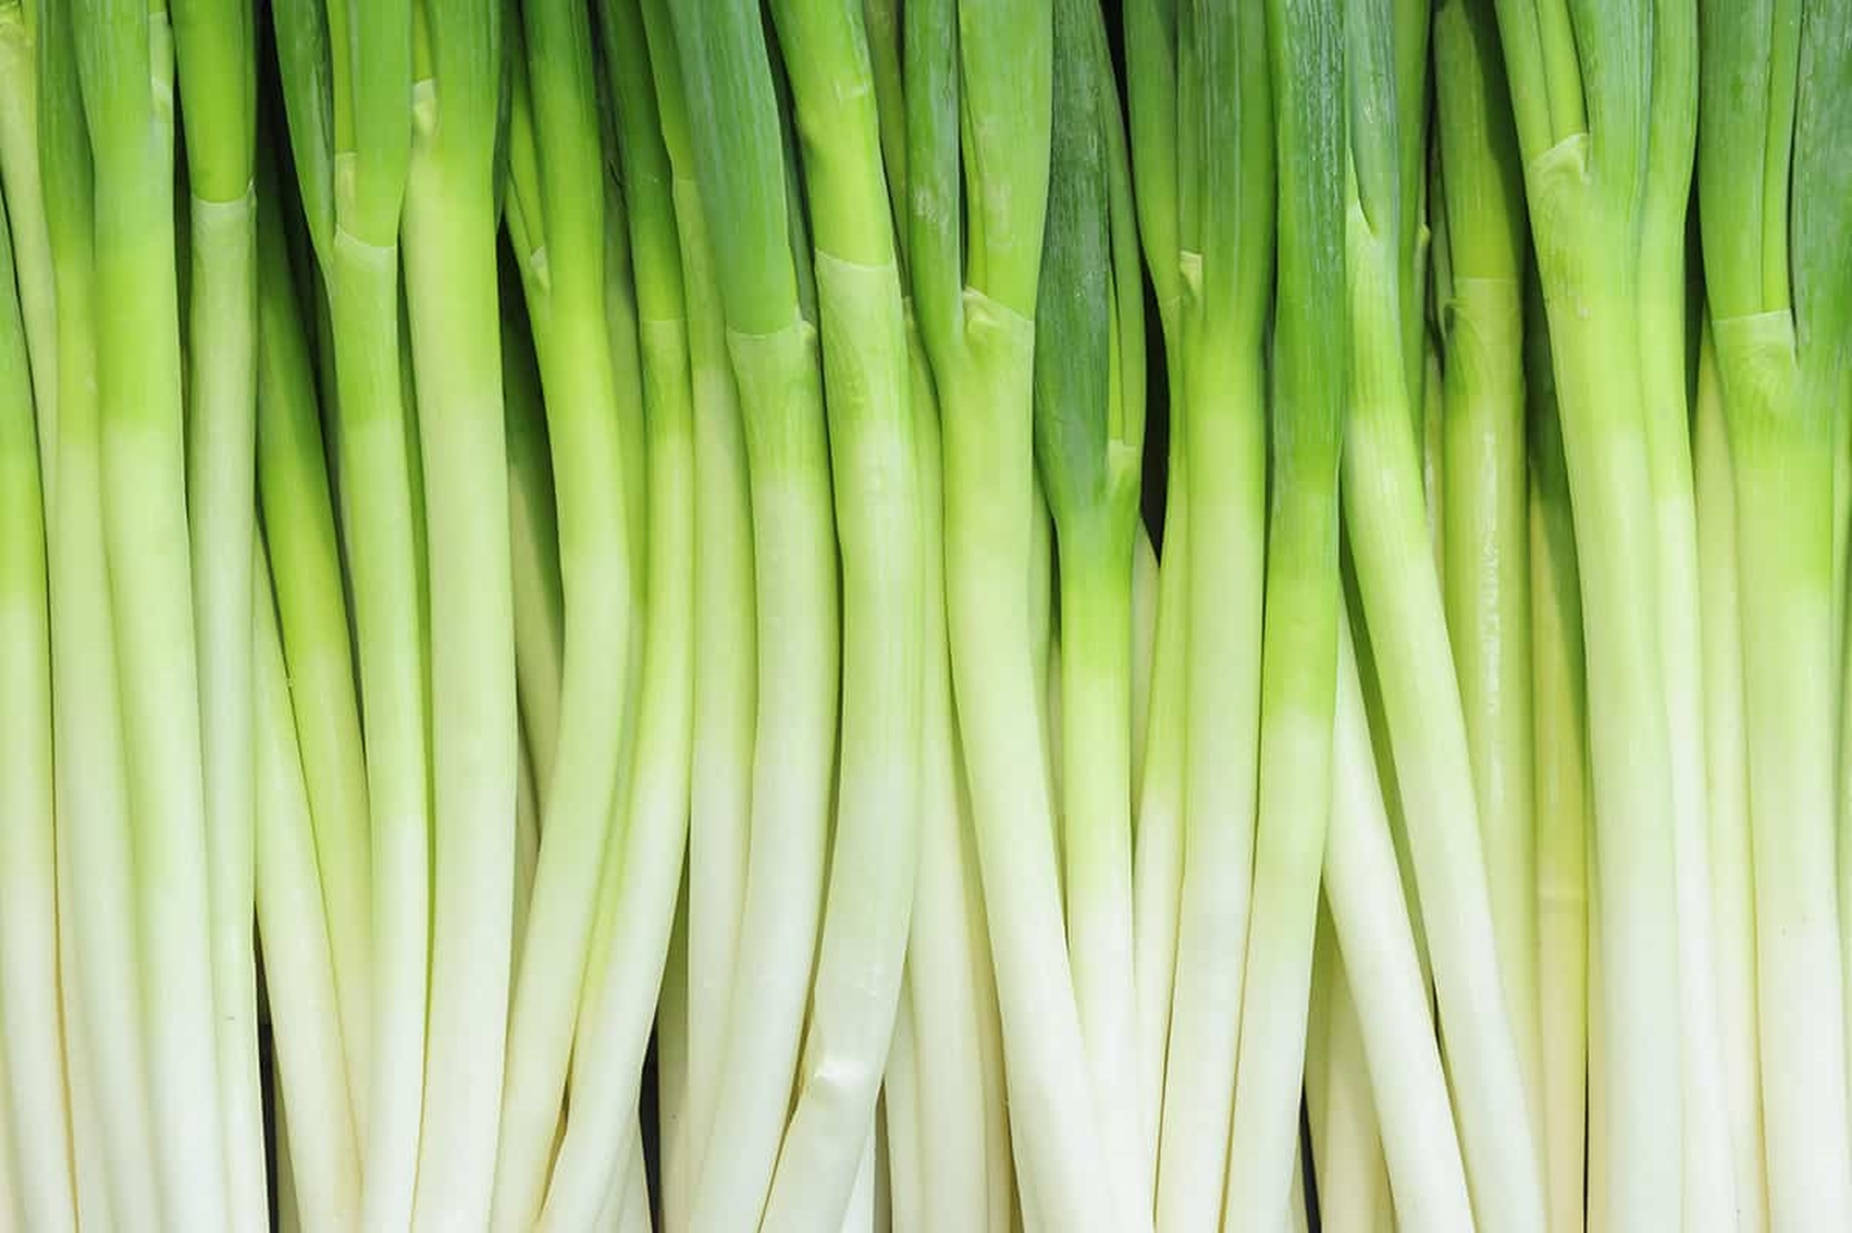 Atypical Green Onion White Stalks Towering Wallpaper